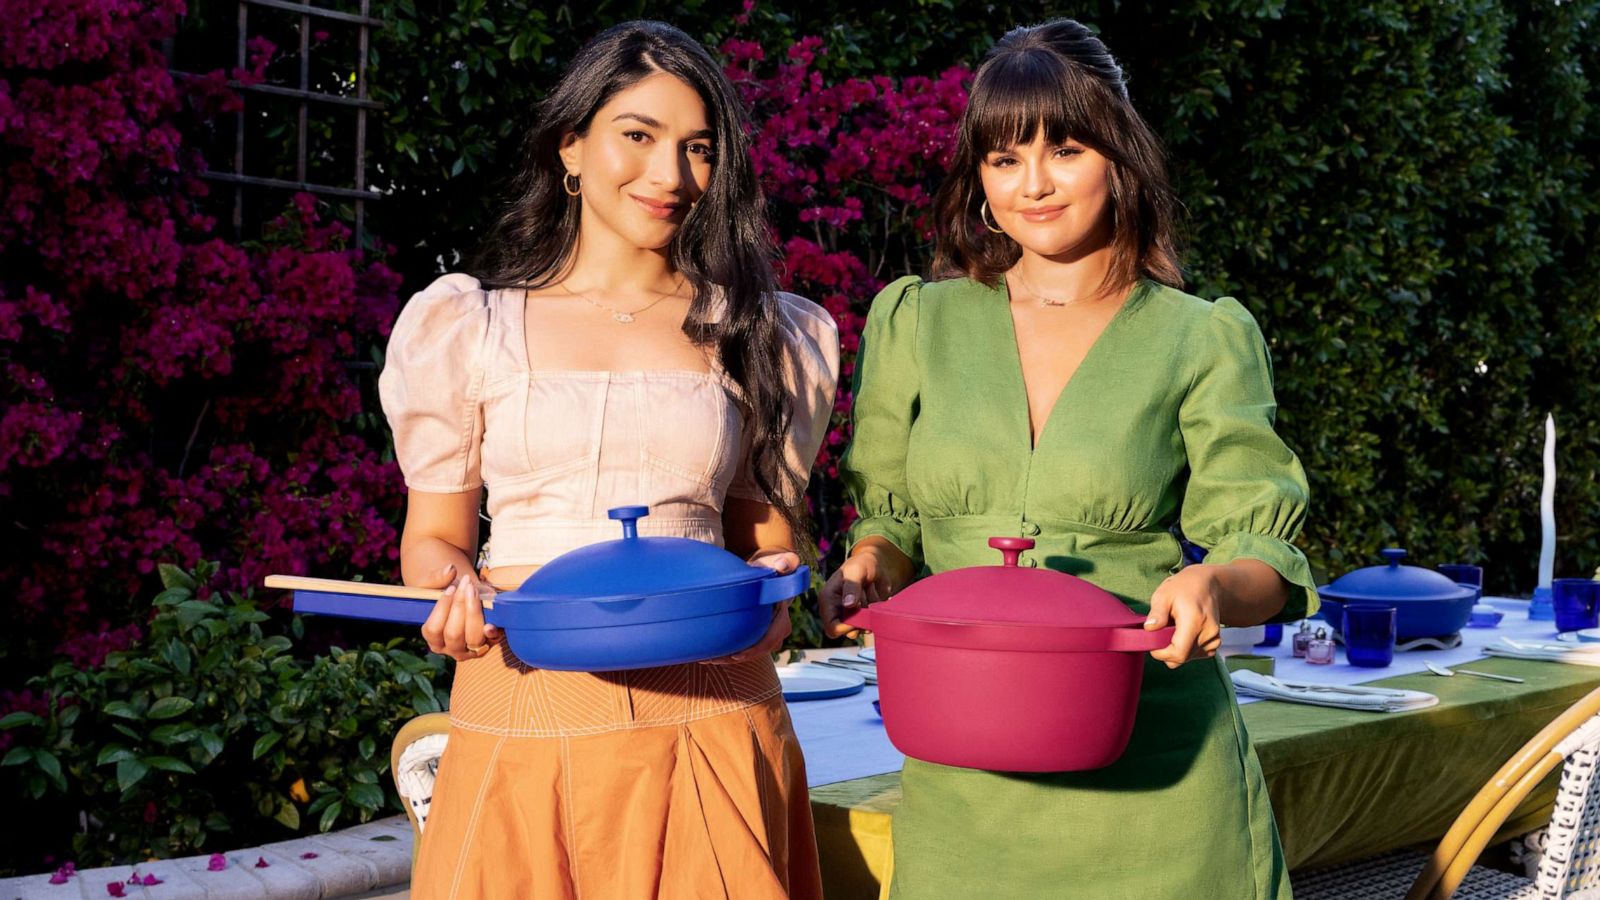 Selena Gomez Just Launched a New CookWear Collection with Our Place